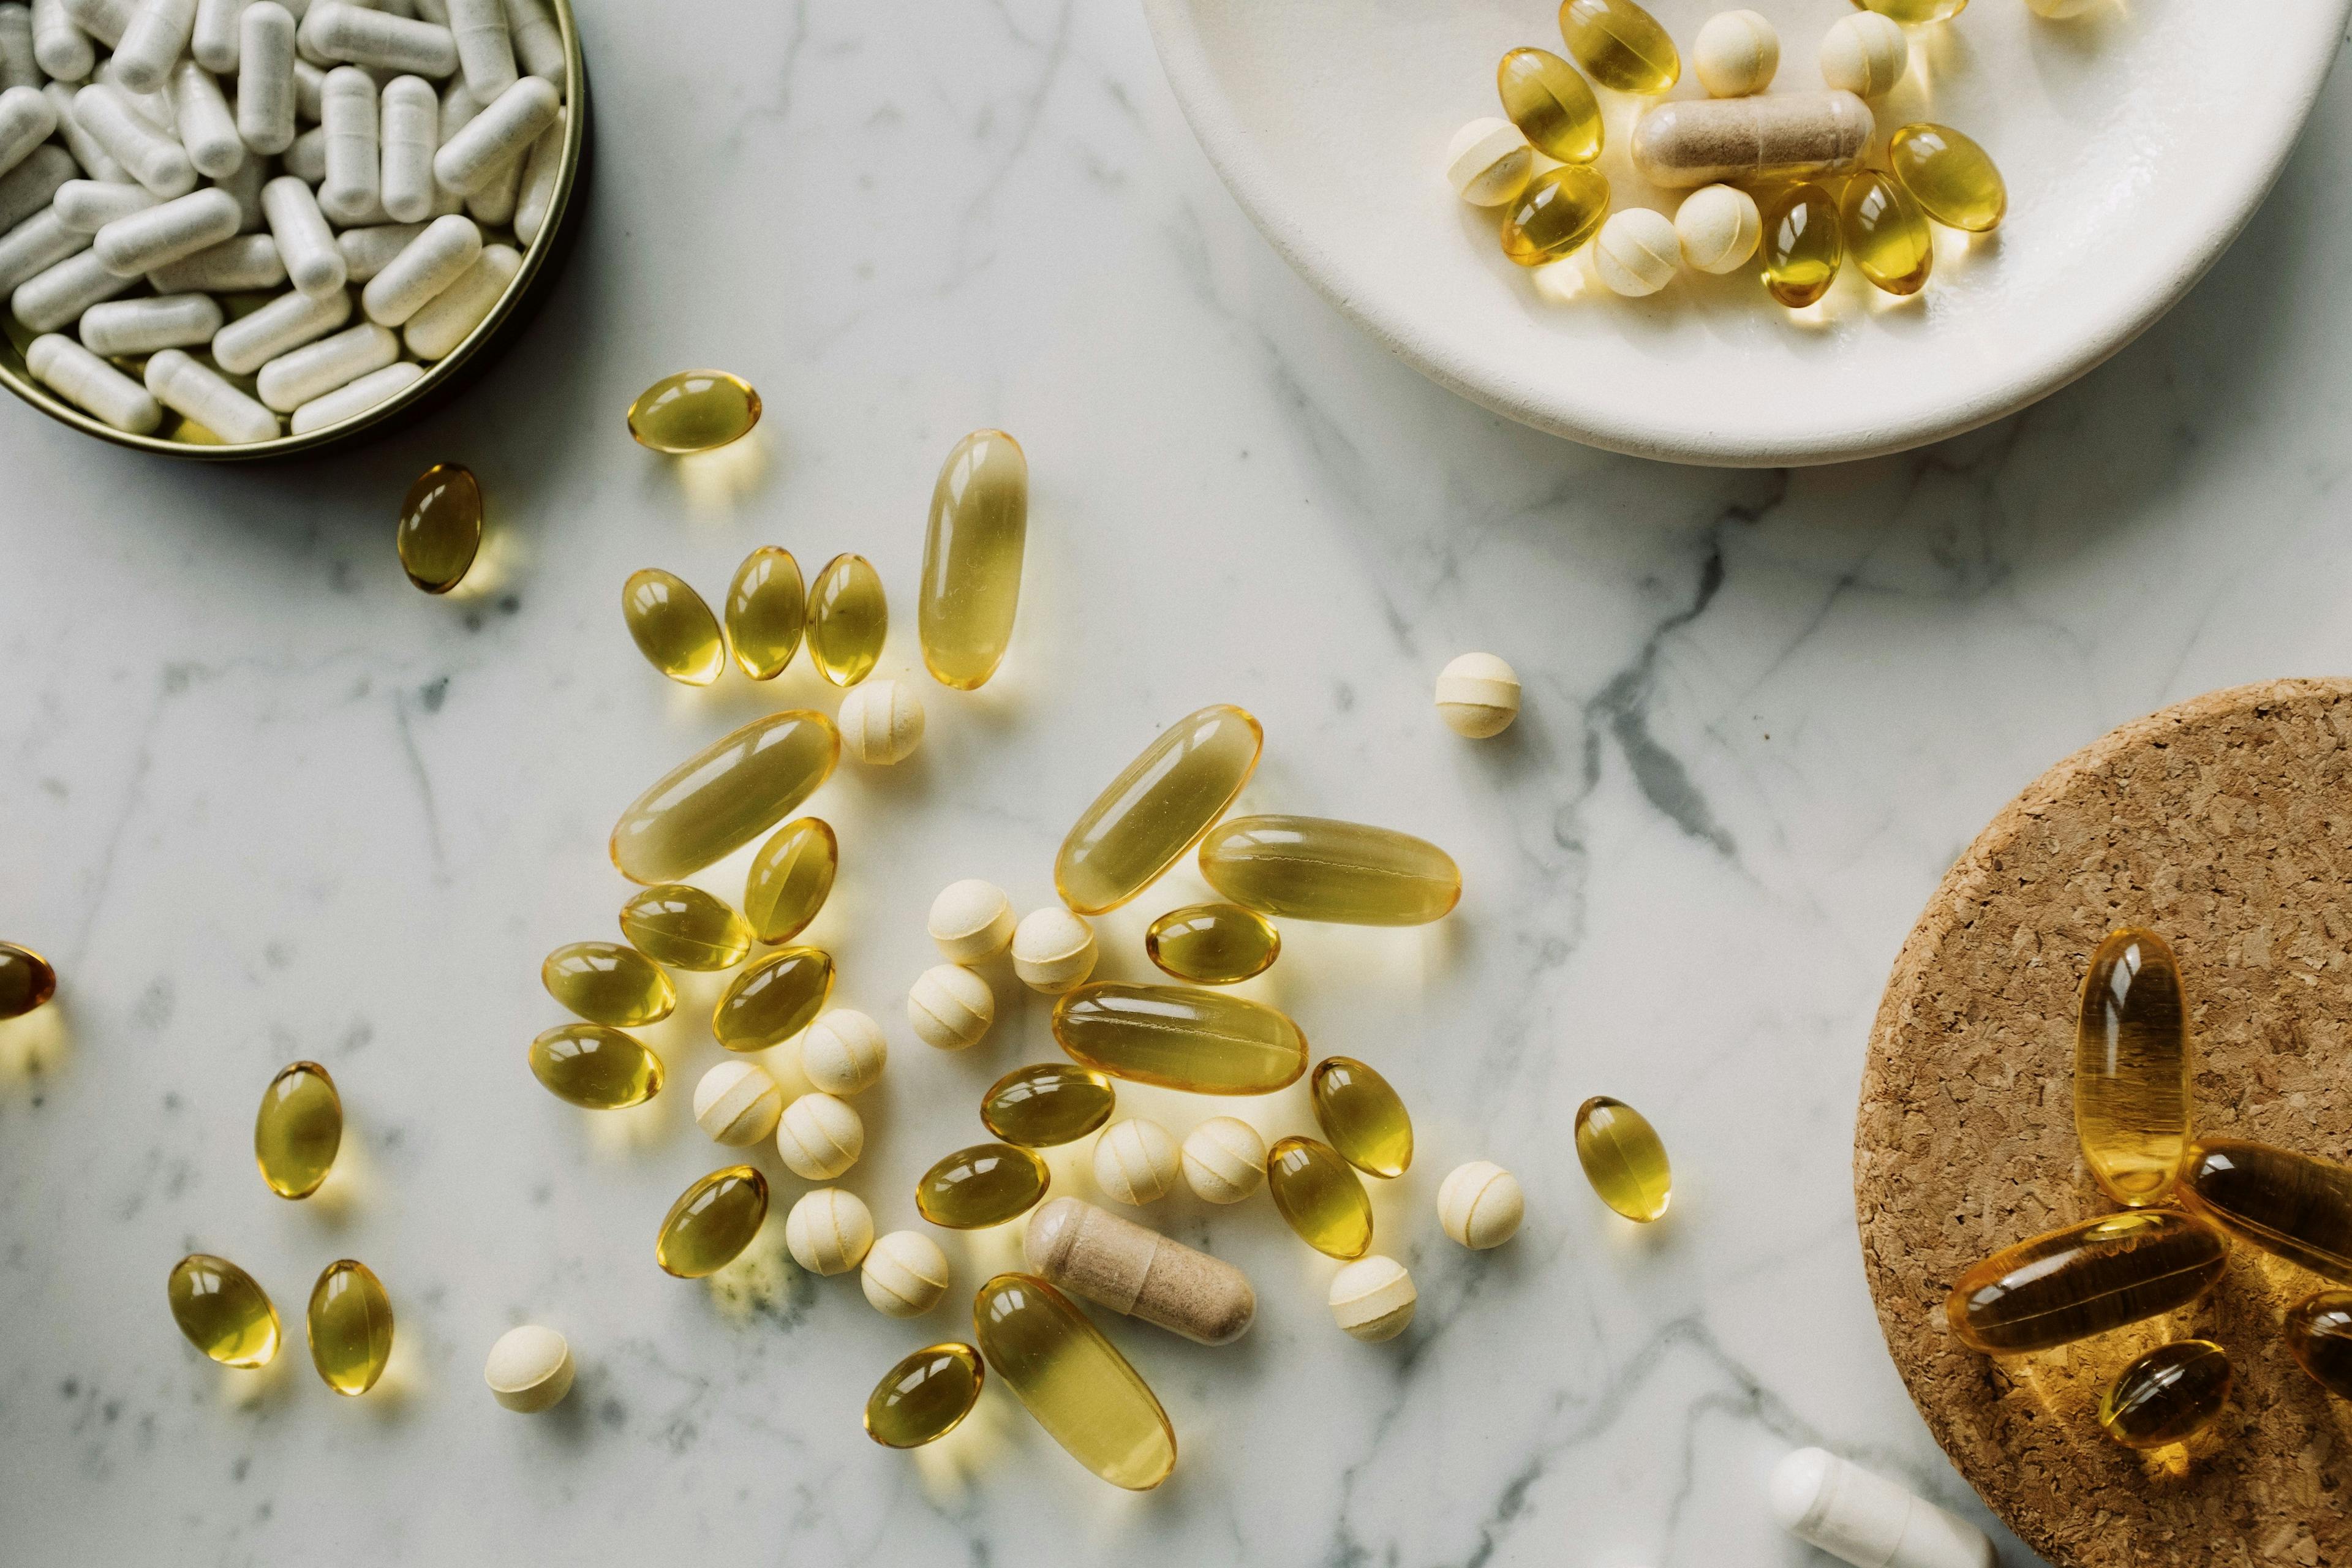 Fewer Supplements During Pregnancy Reduces Rates of Atopic Diseases